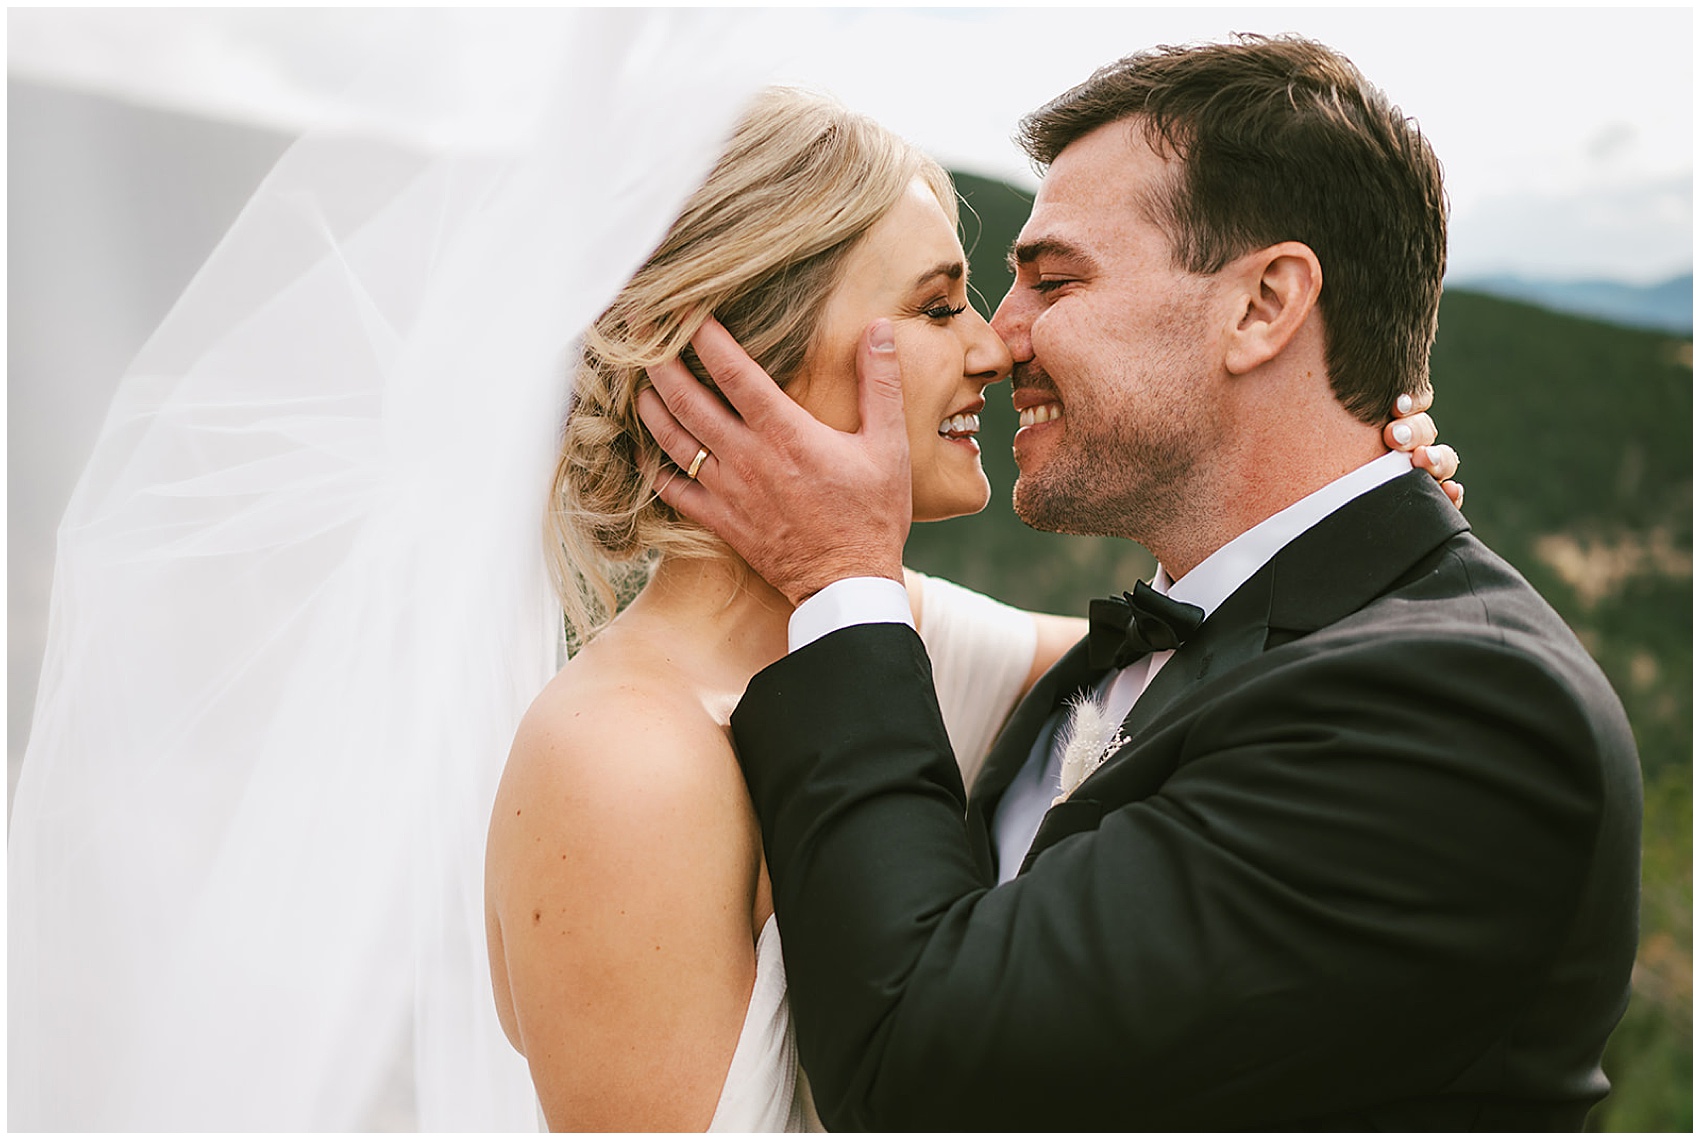 Newlyweds lean in for a kiss in a black tuxedo and white dress with a long veil flowing in the wind